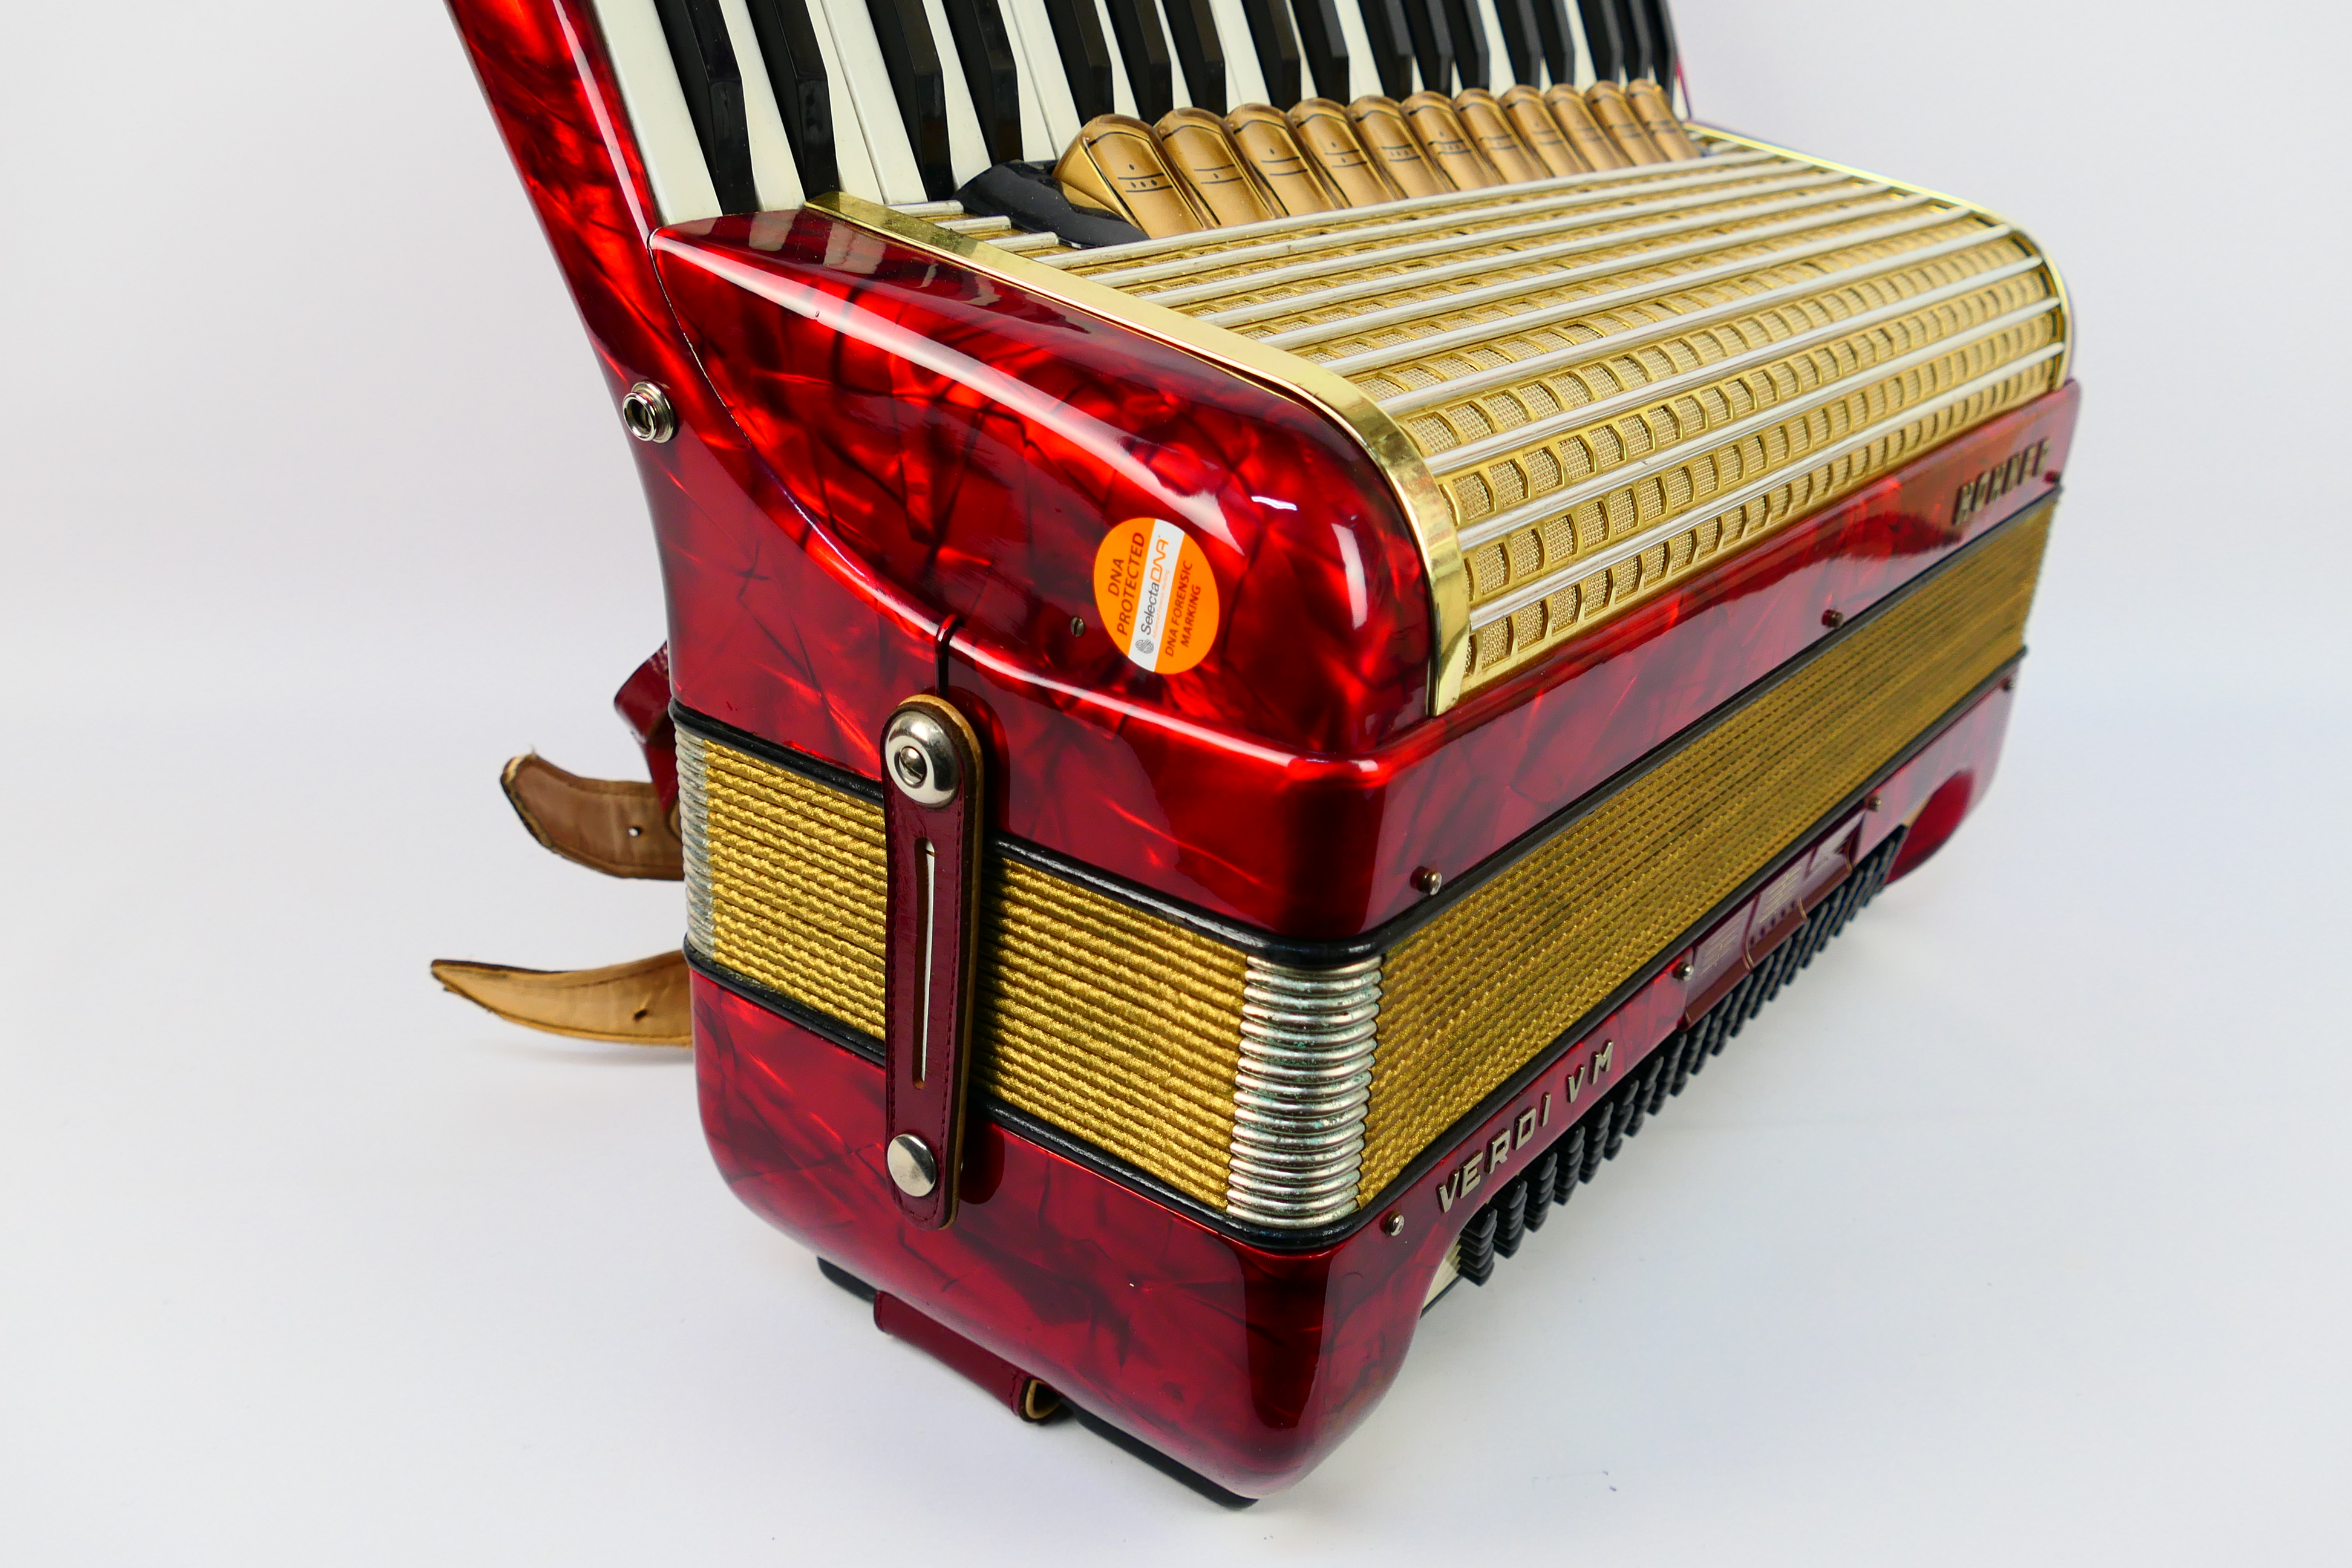 A vintage Hohner Verdi VM piano accordion, 41 keys and 120 basses, marbled red finish, - Image 11 of 18